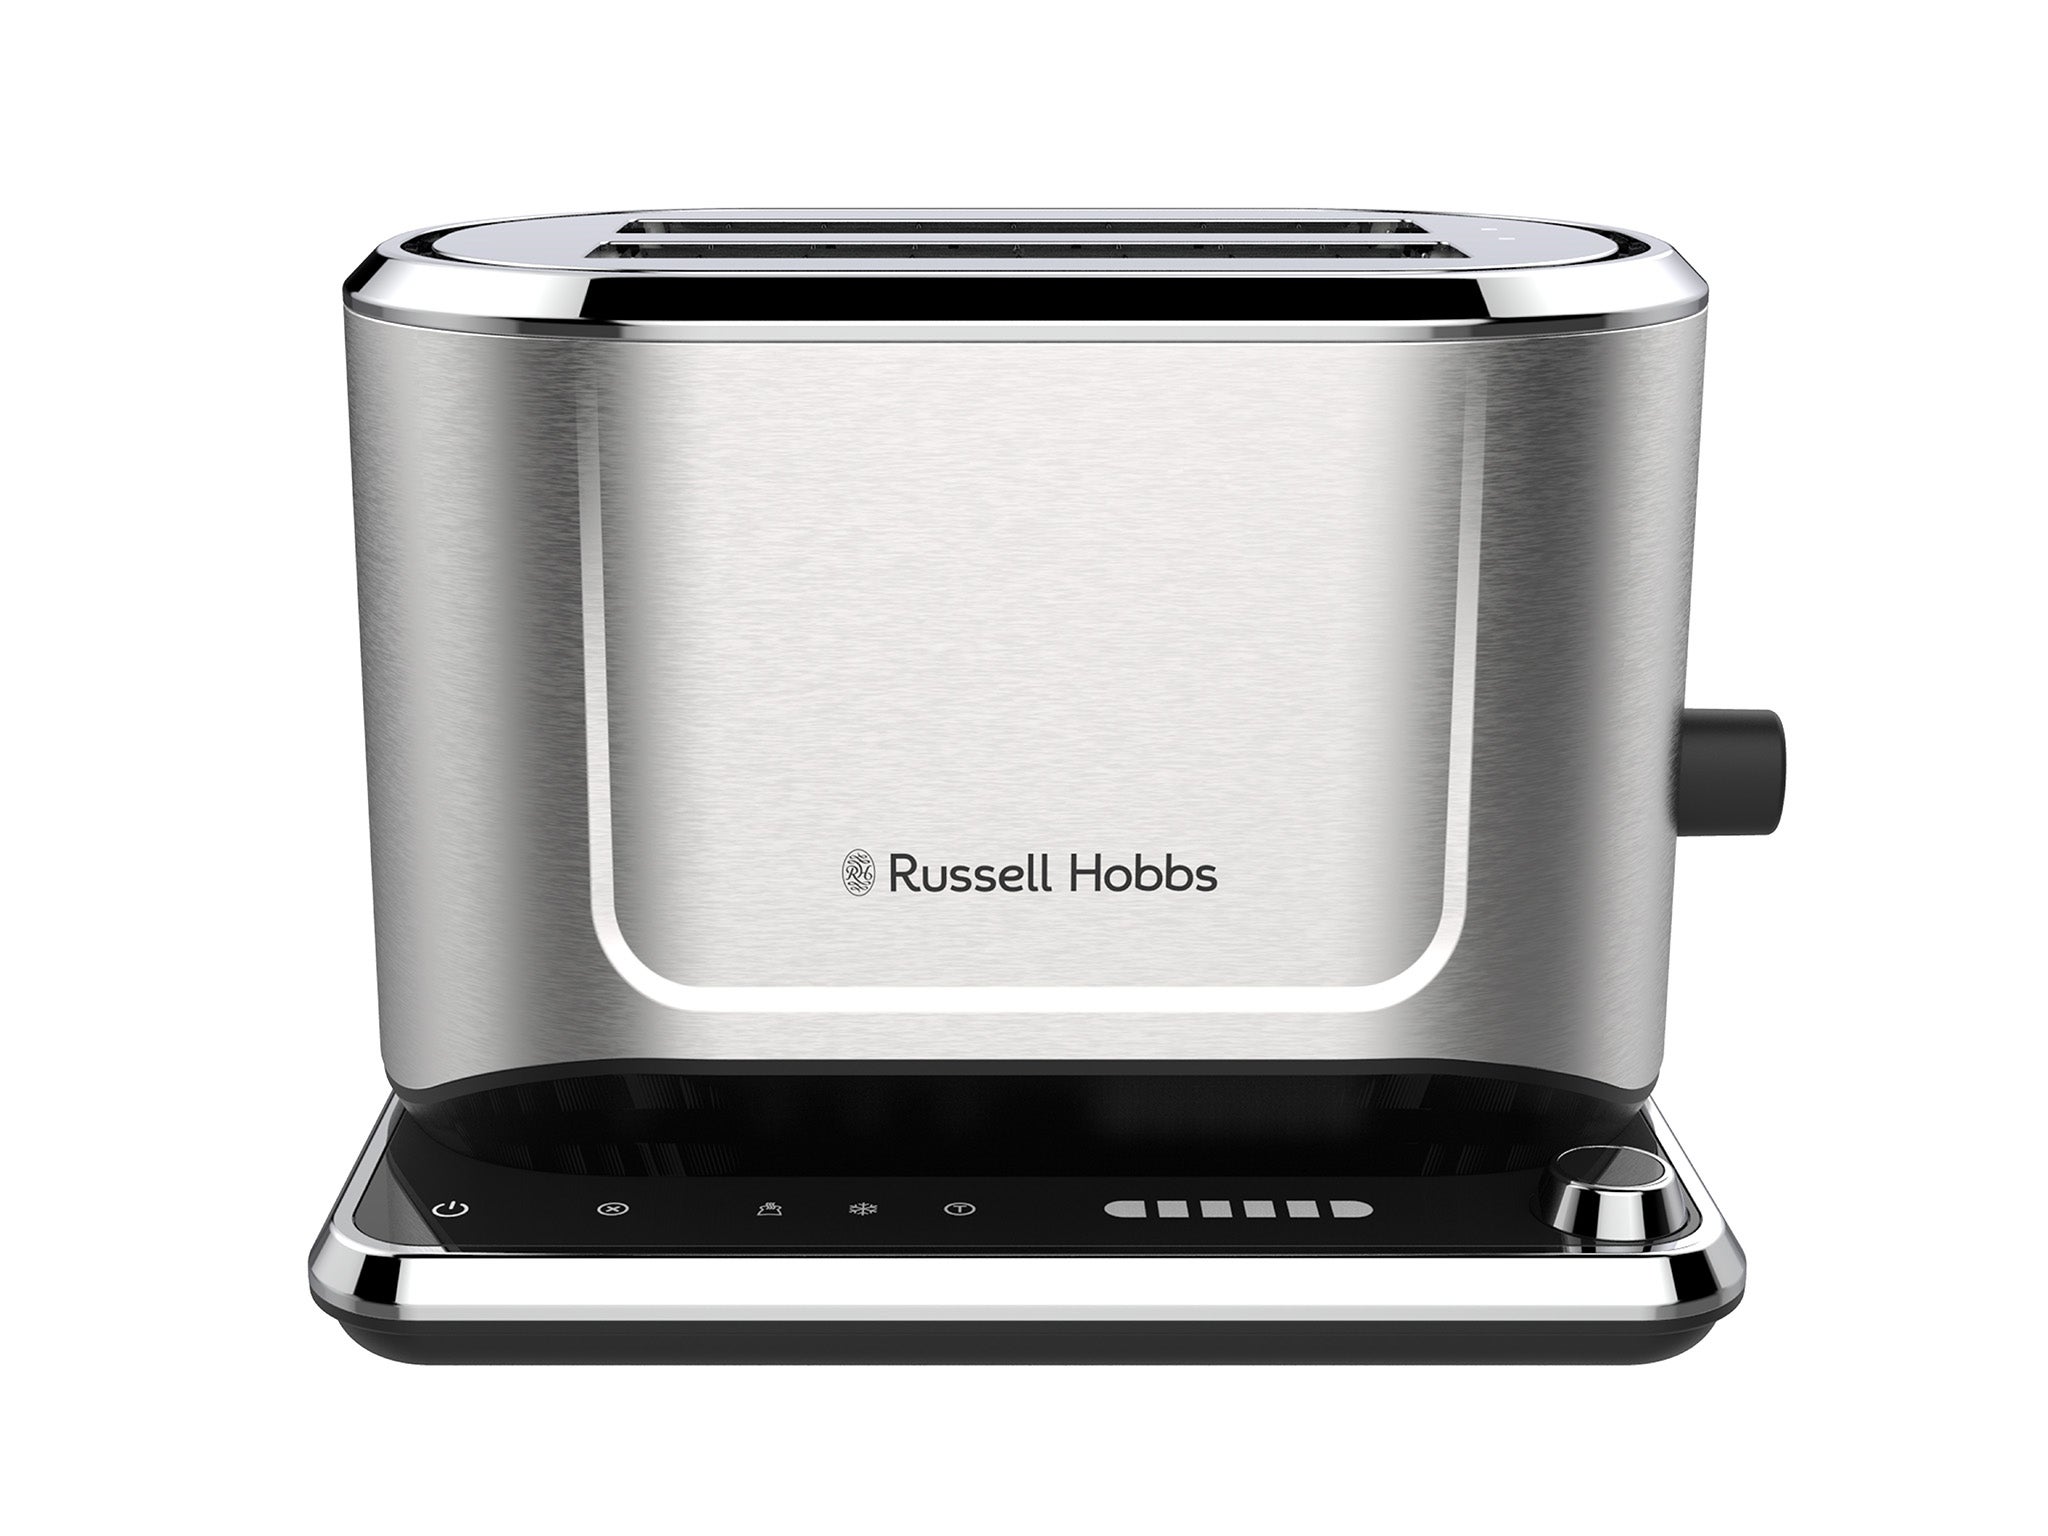 Russell Hobbs attentiv two-slice toaster